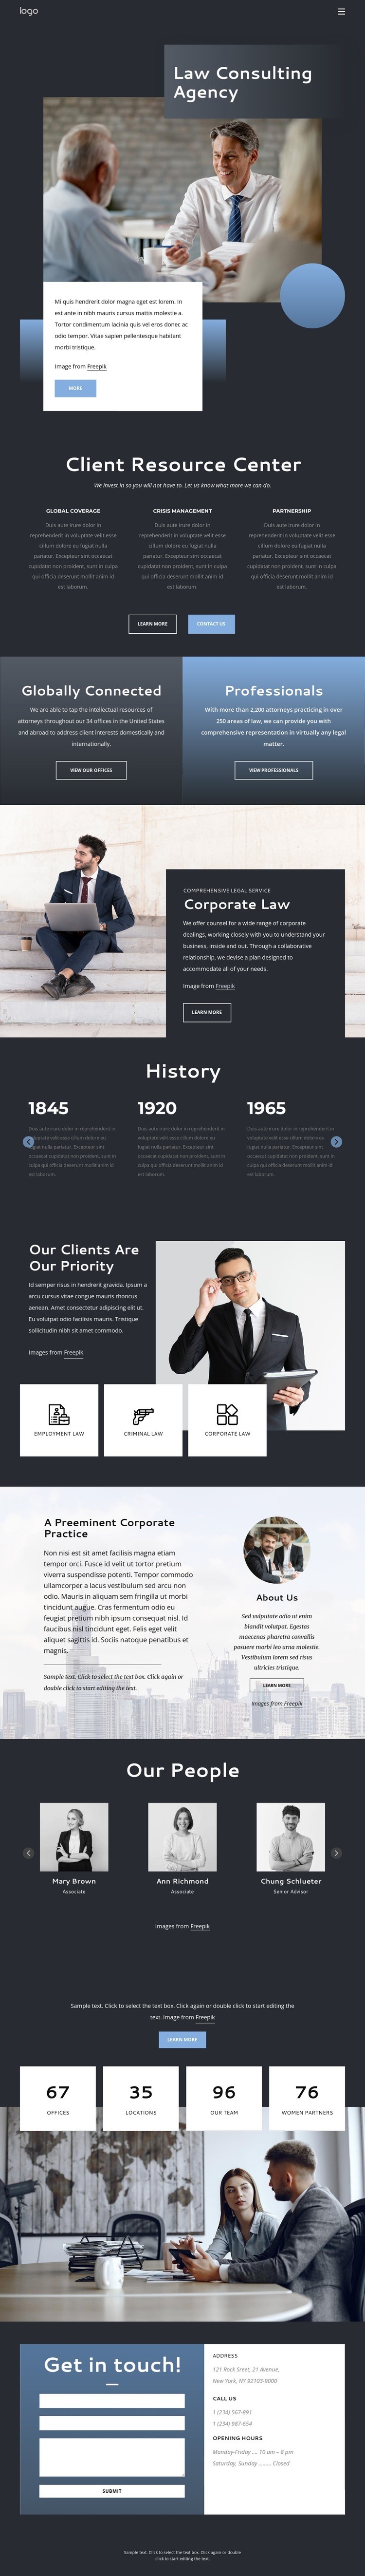 Law consulting agency Webflow Template Alternative